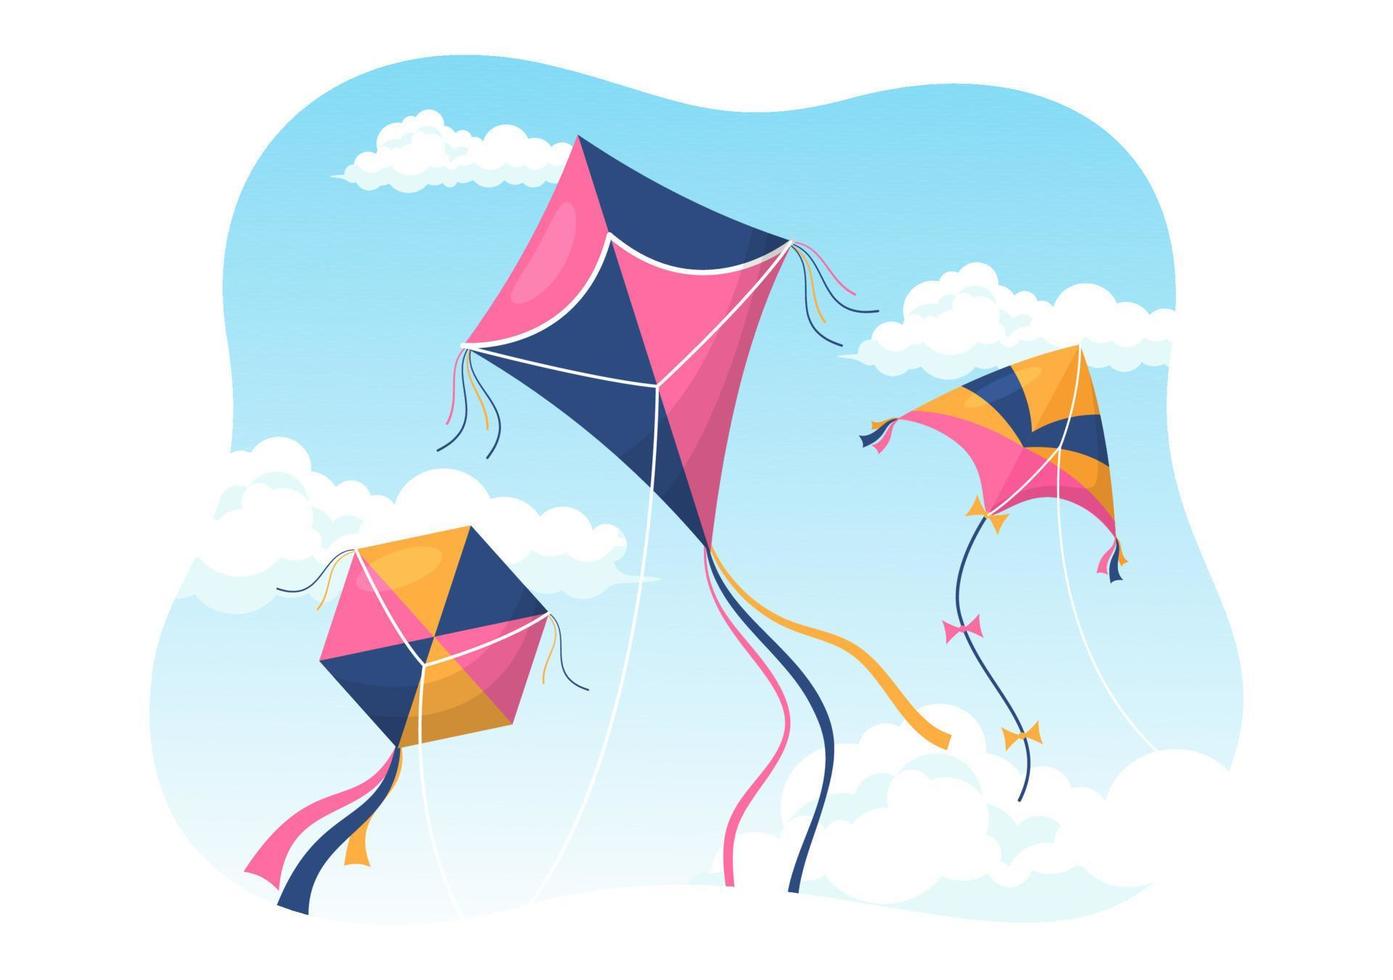 National Kite Flying Day on February 8 of Sunny Sky Background in Kids Summer Leisure Activity in Flat Cartoon Hand Drawn Templates Illustration vector